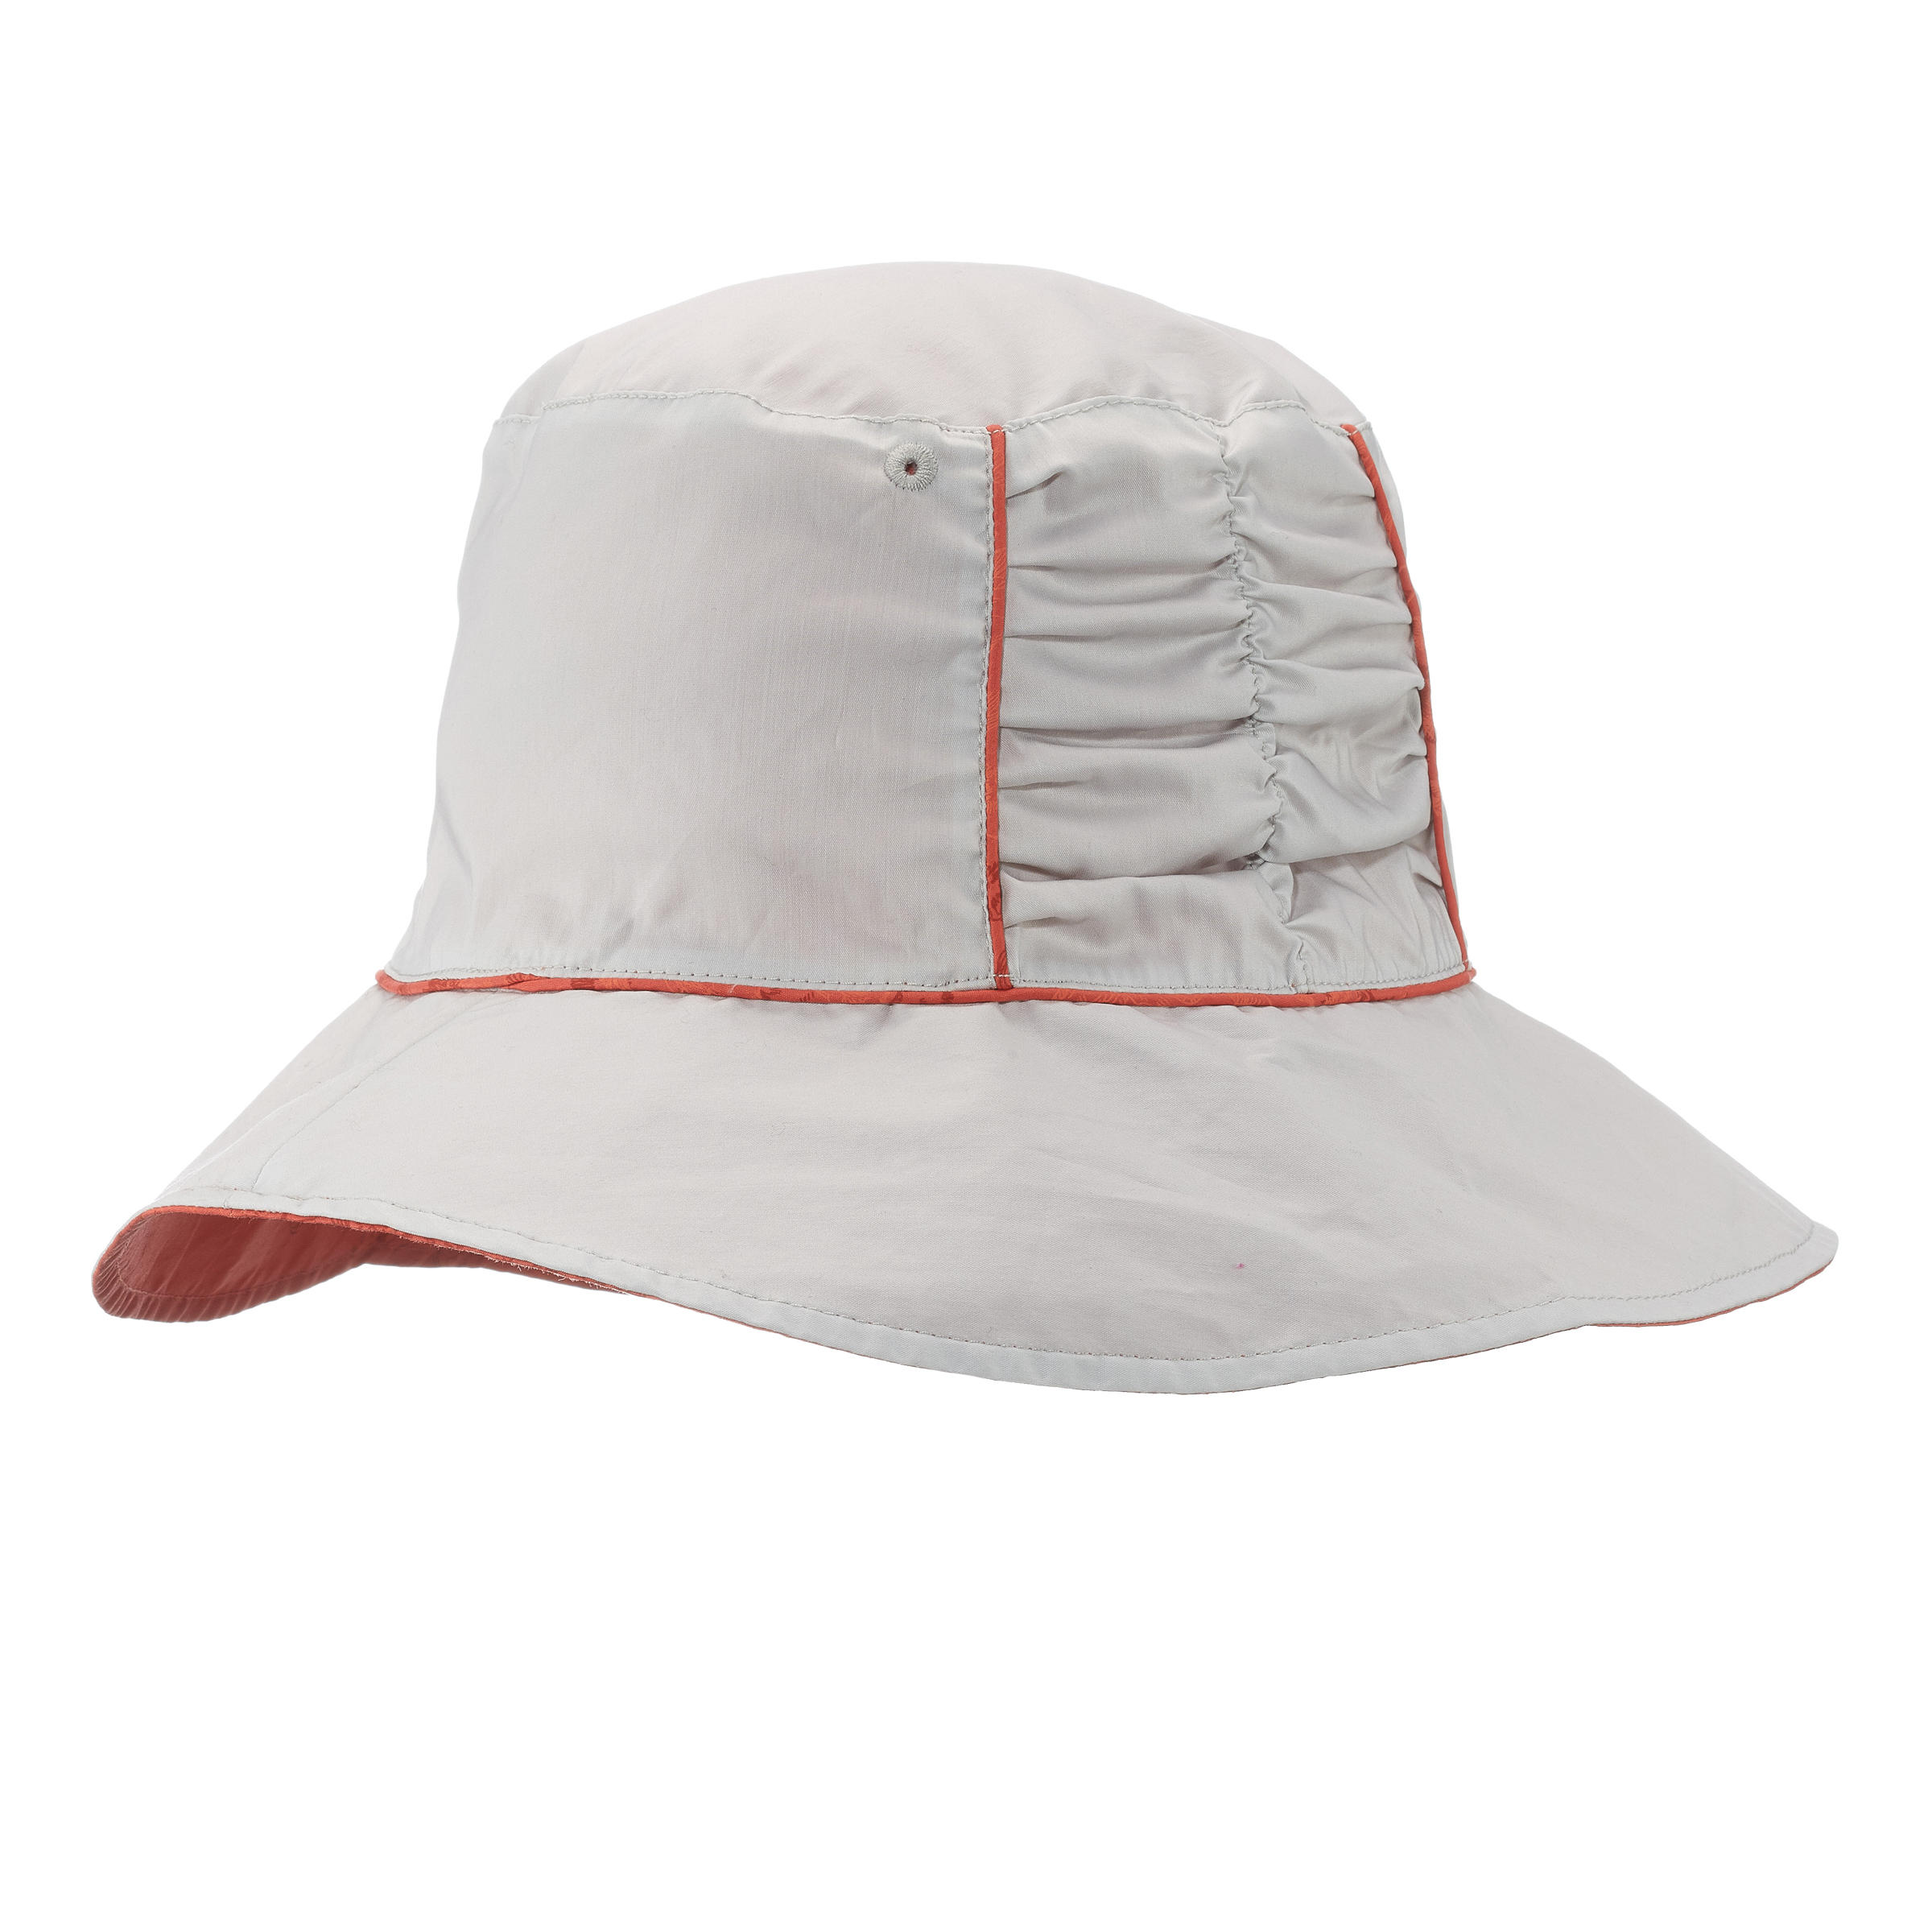 FORCLAZ Reversible Woman’s Hiking Hat 500 - Grey